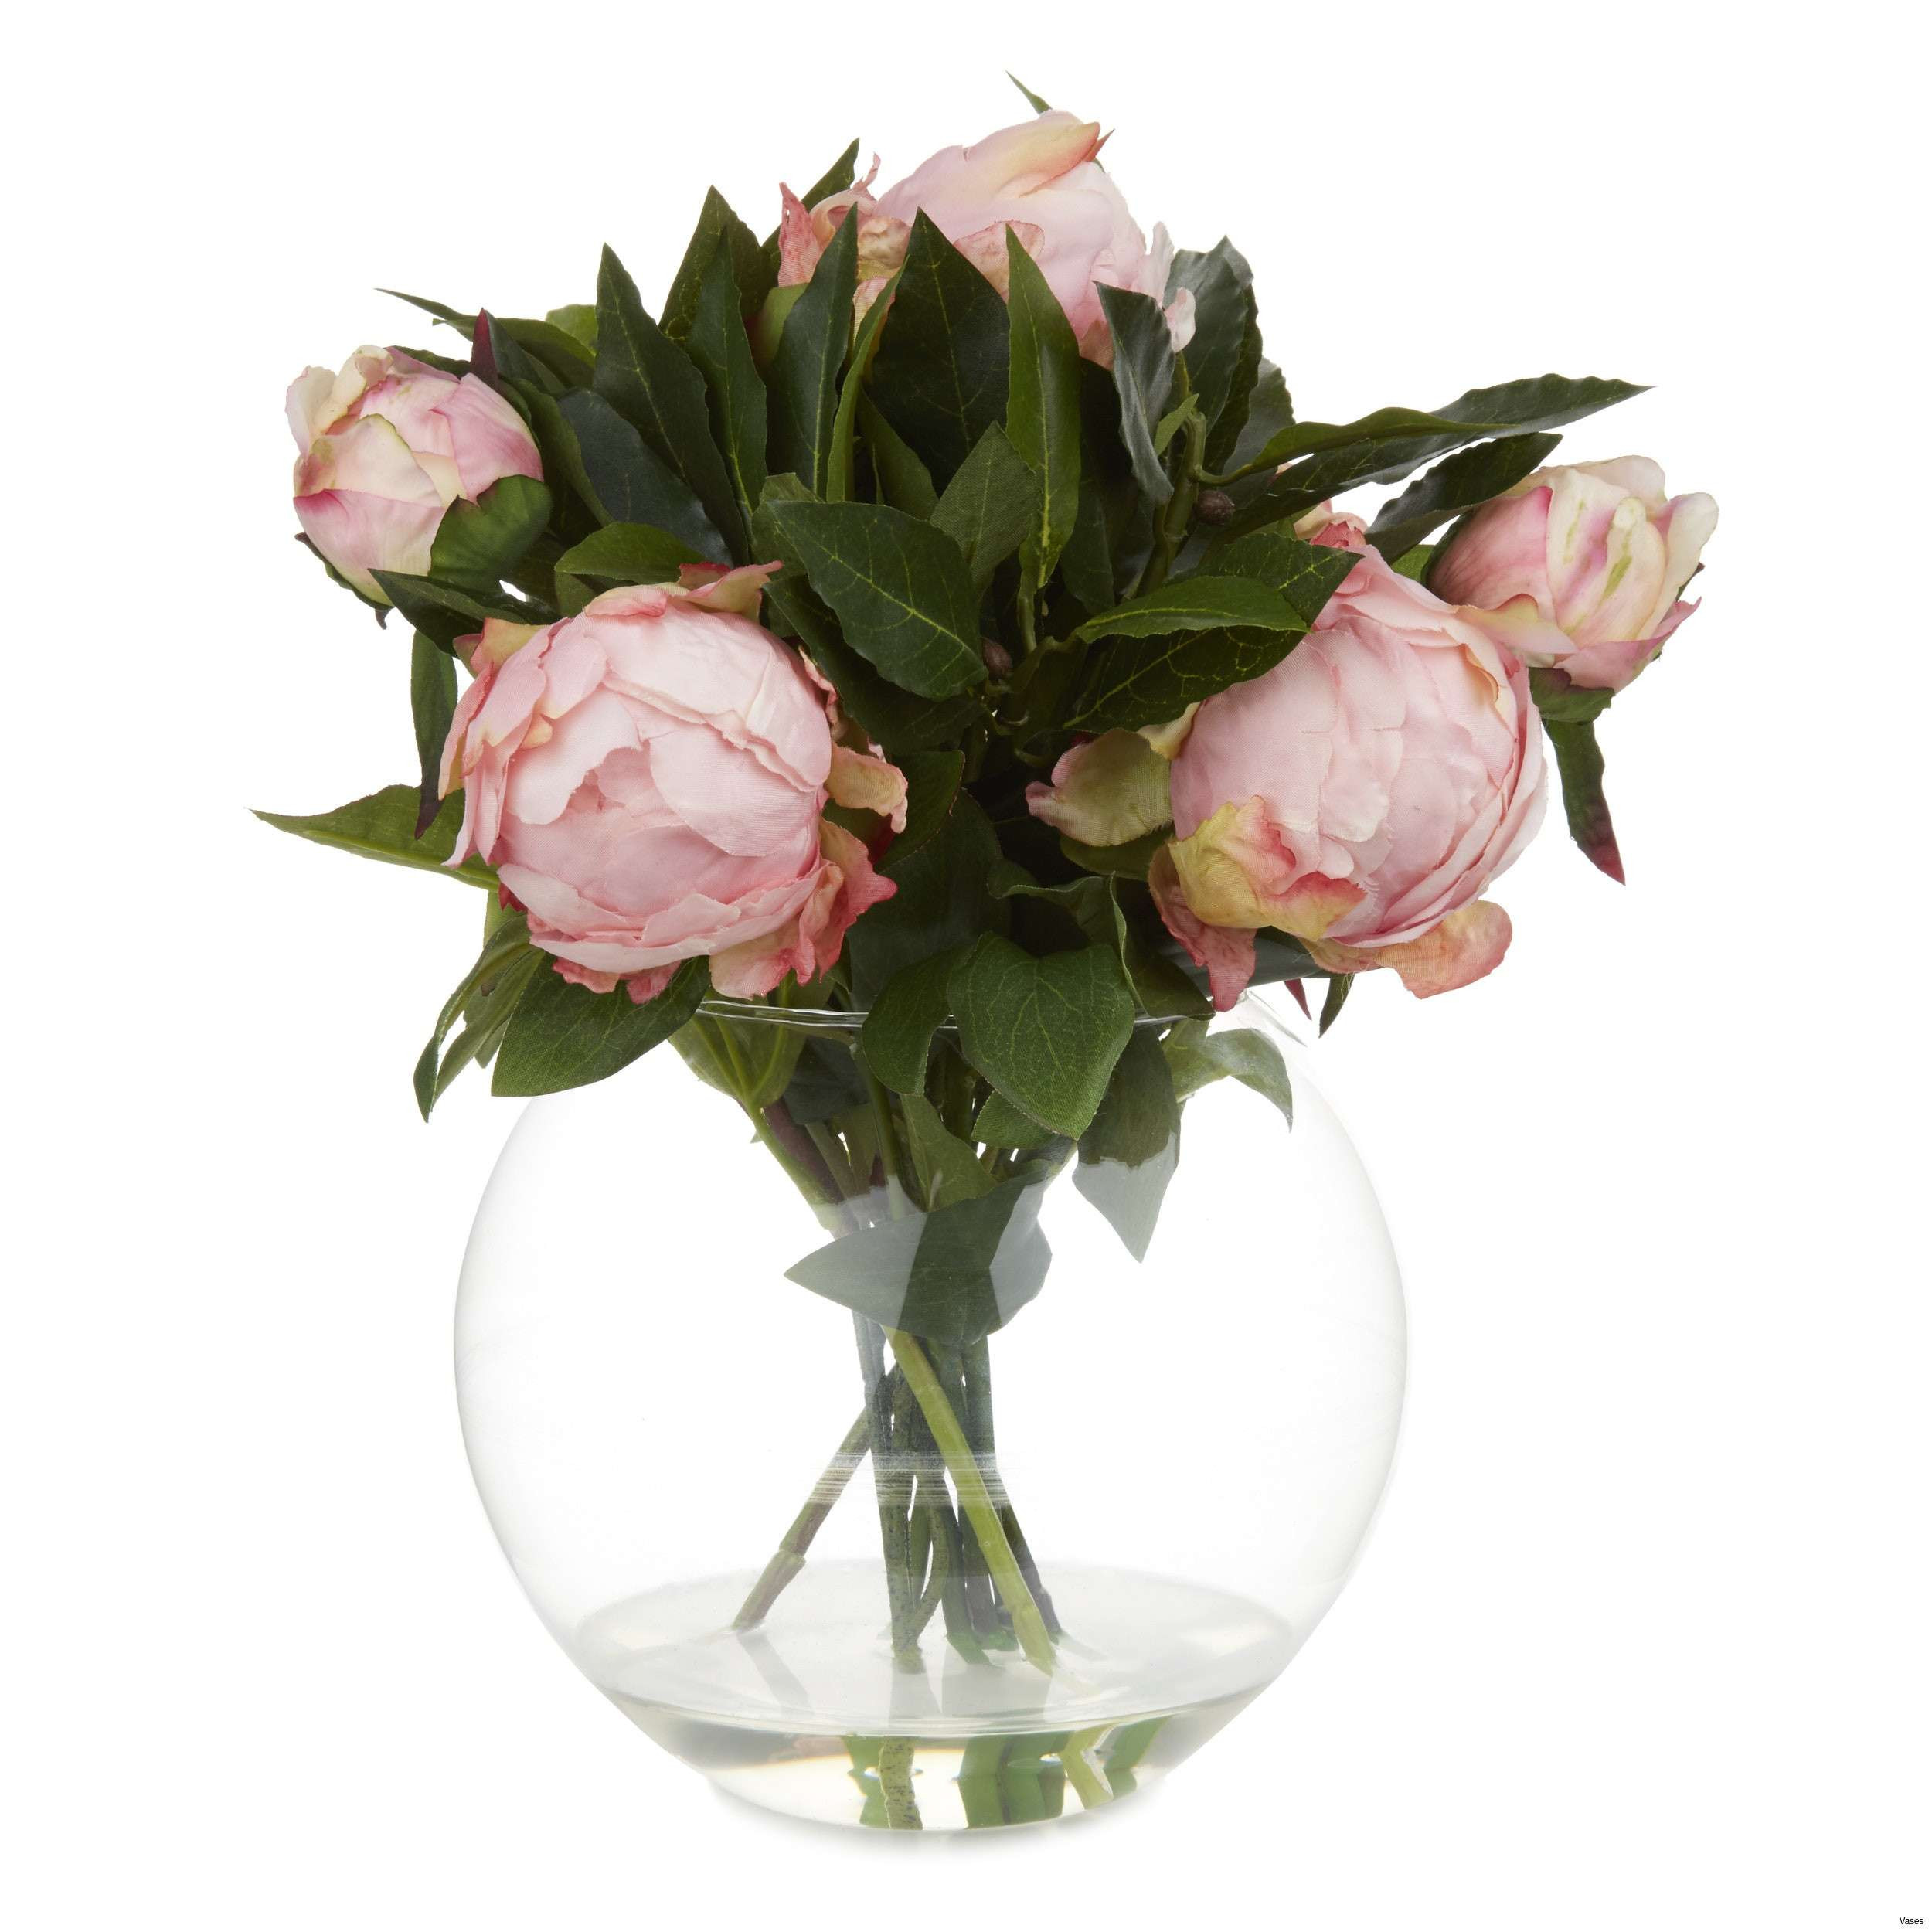 21 Great Big Flower Vases for Sale 2024 free download big flower vases for sale of 44 collection flower decoration ideas pic amazing home decor ideas with regard to 34 luxury pink fake flowers design ideas cheap faux flowers